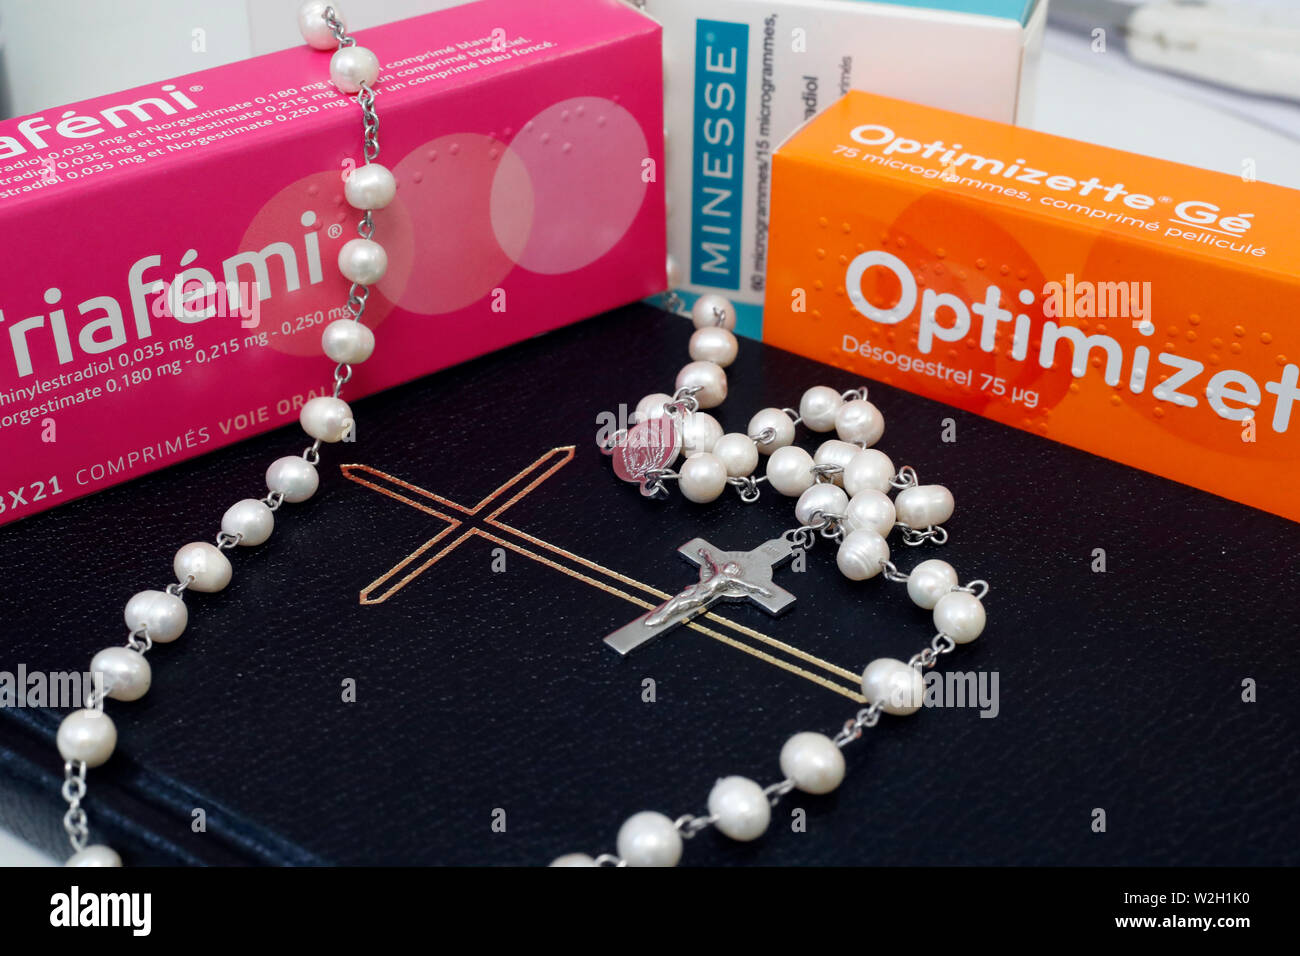 Combined oral contraceptive pill (COCP)  catholic rosary and bible.  France. Stock Photo